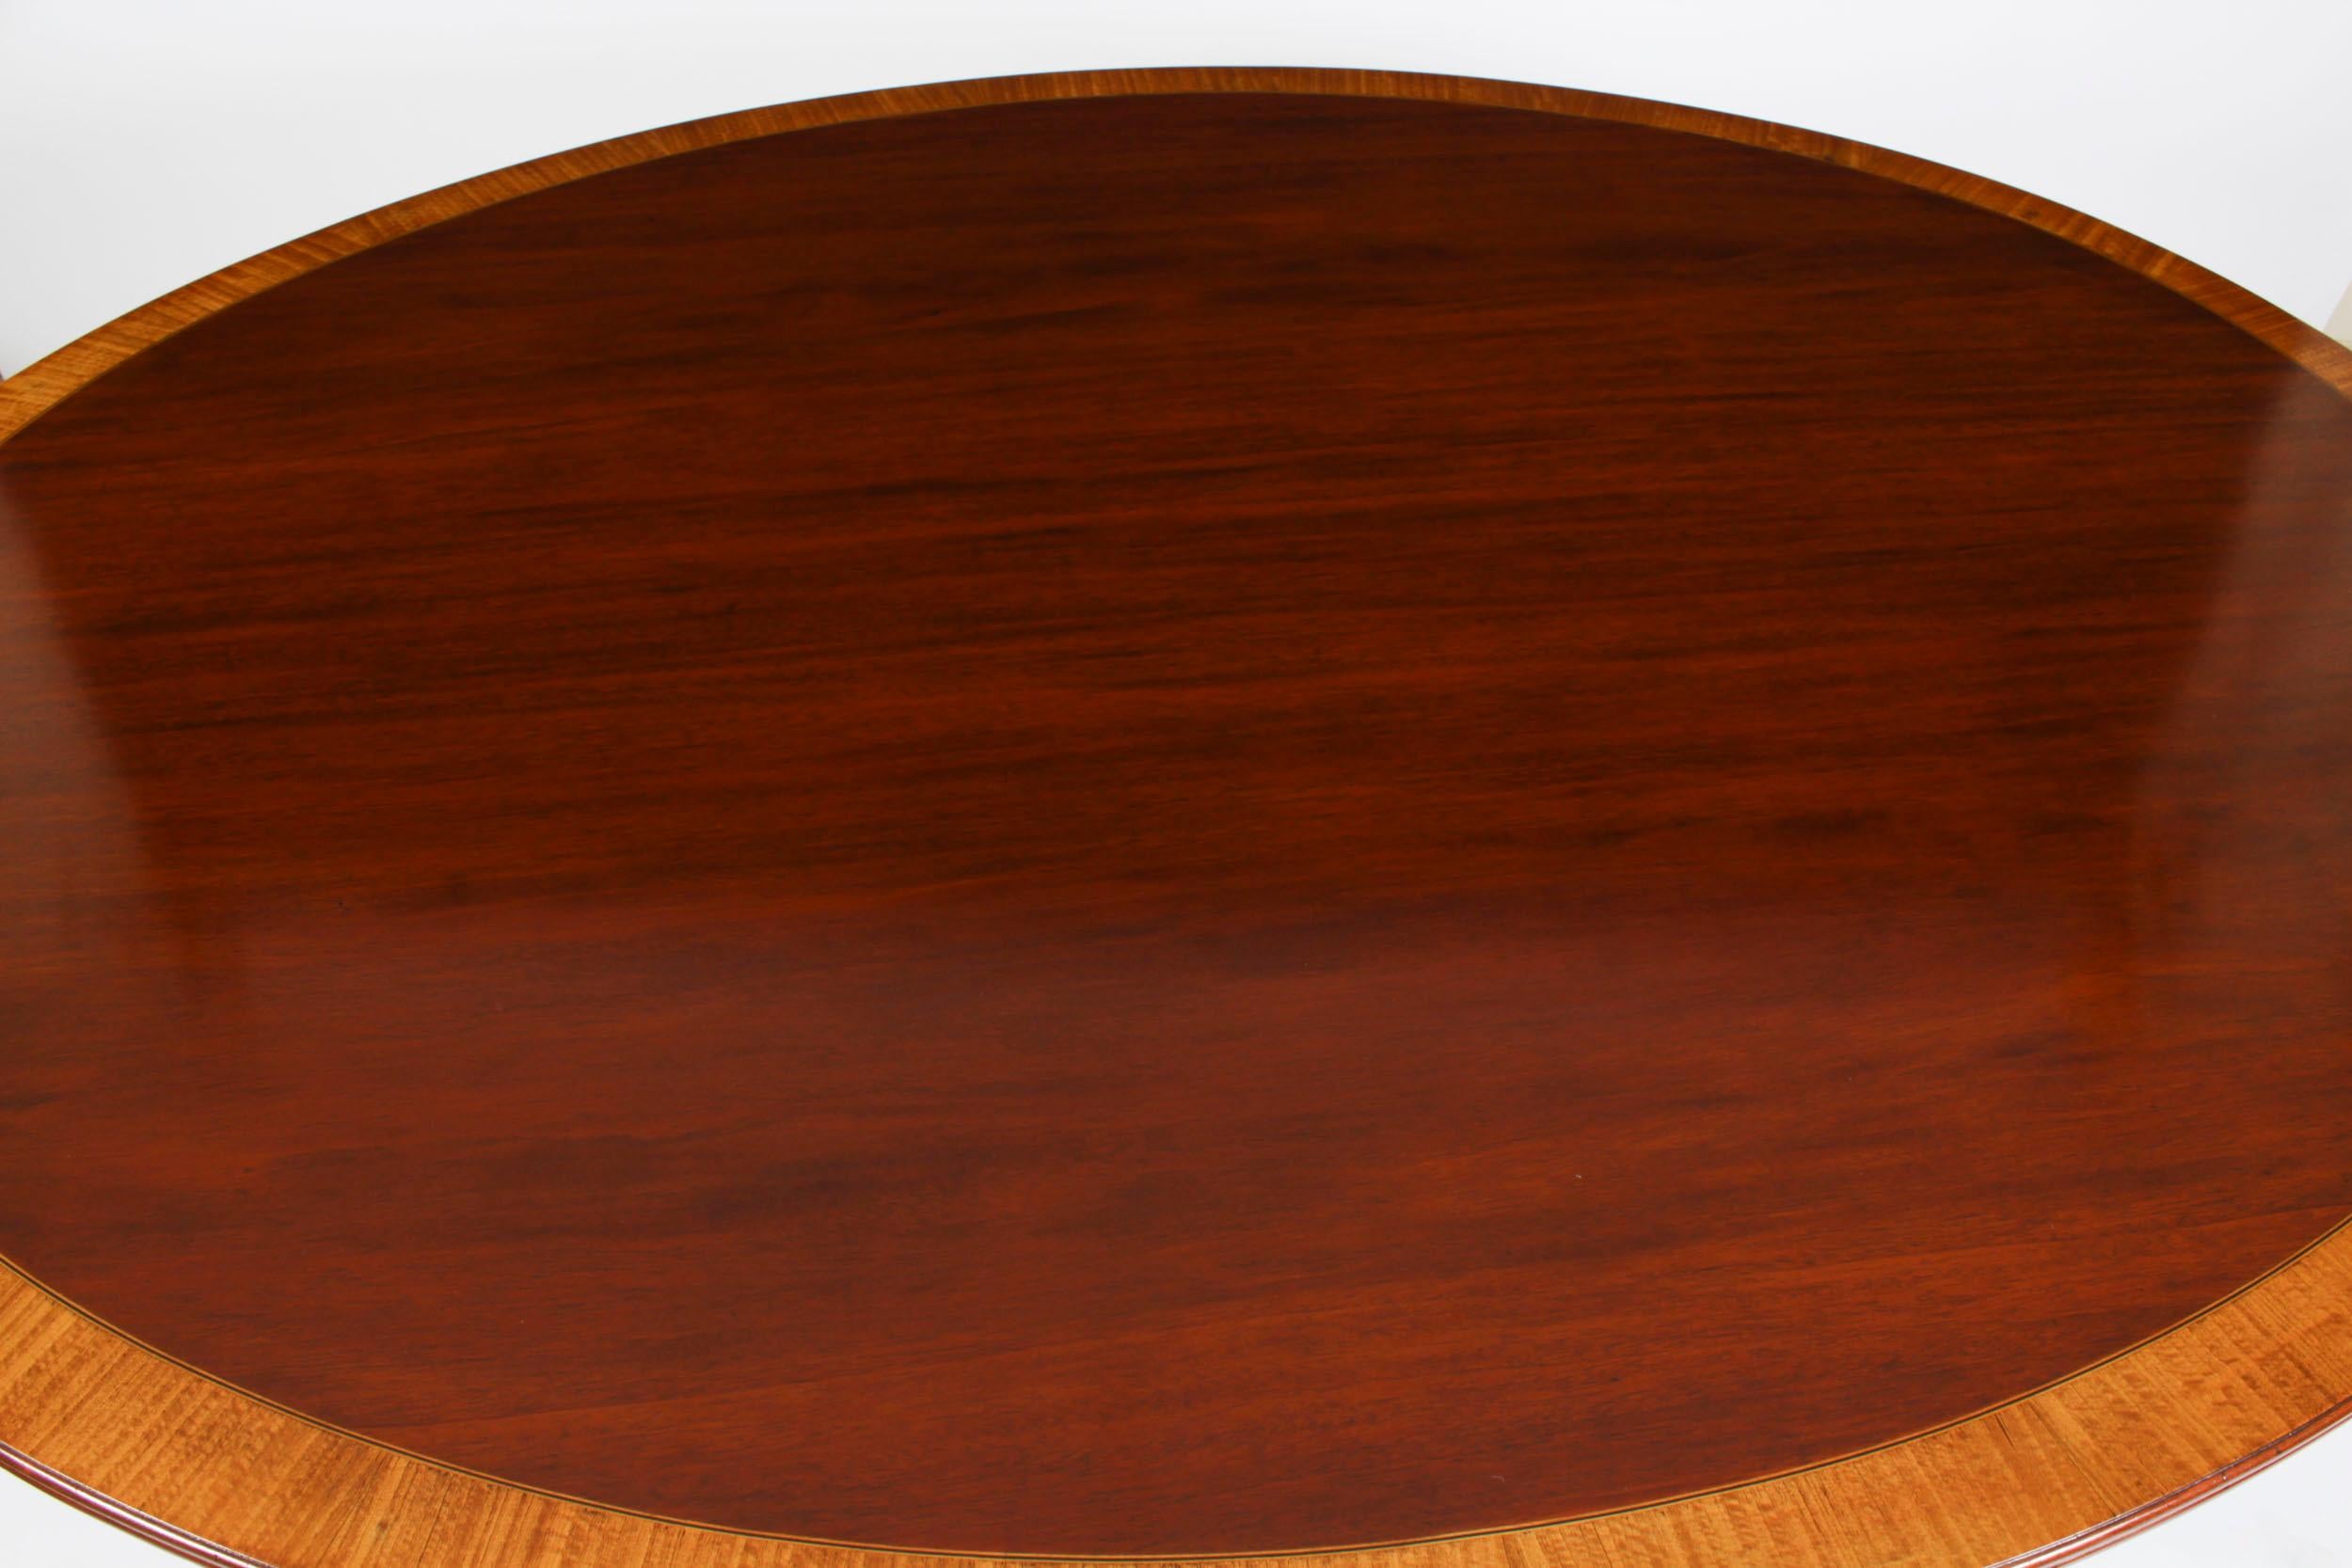 Antique Oval Mahogany Tilt Top Dining Table, Early 20th Century For Sale 4